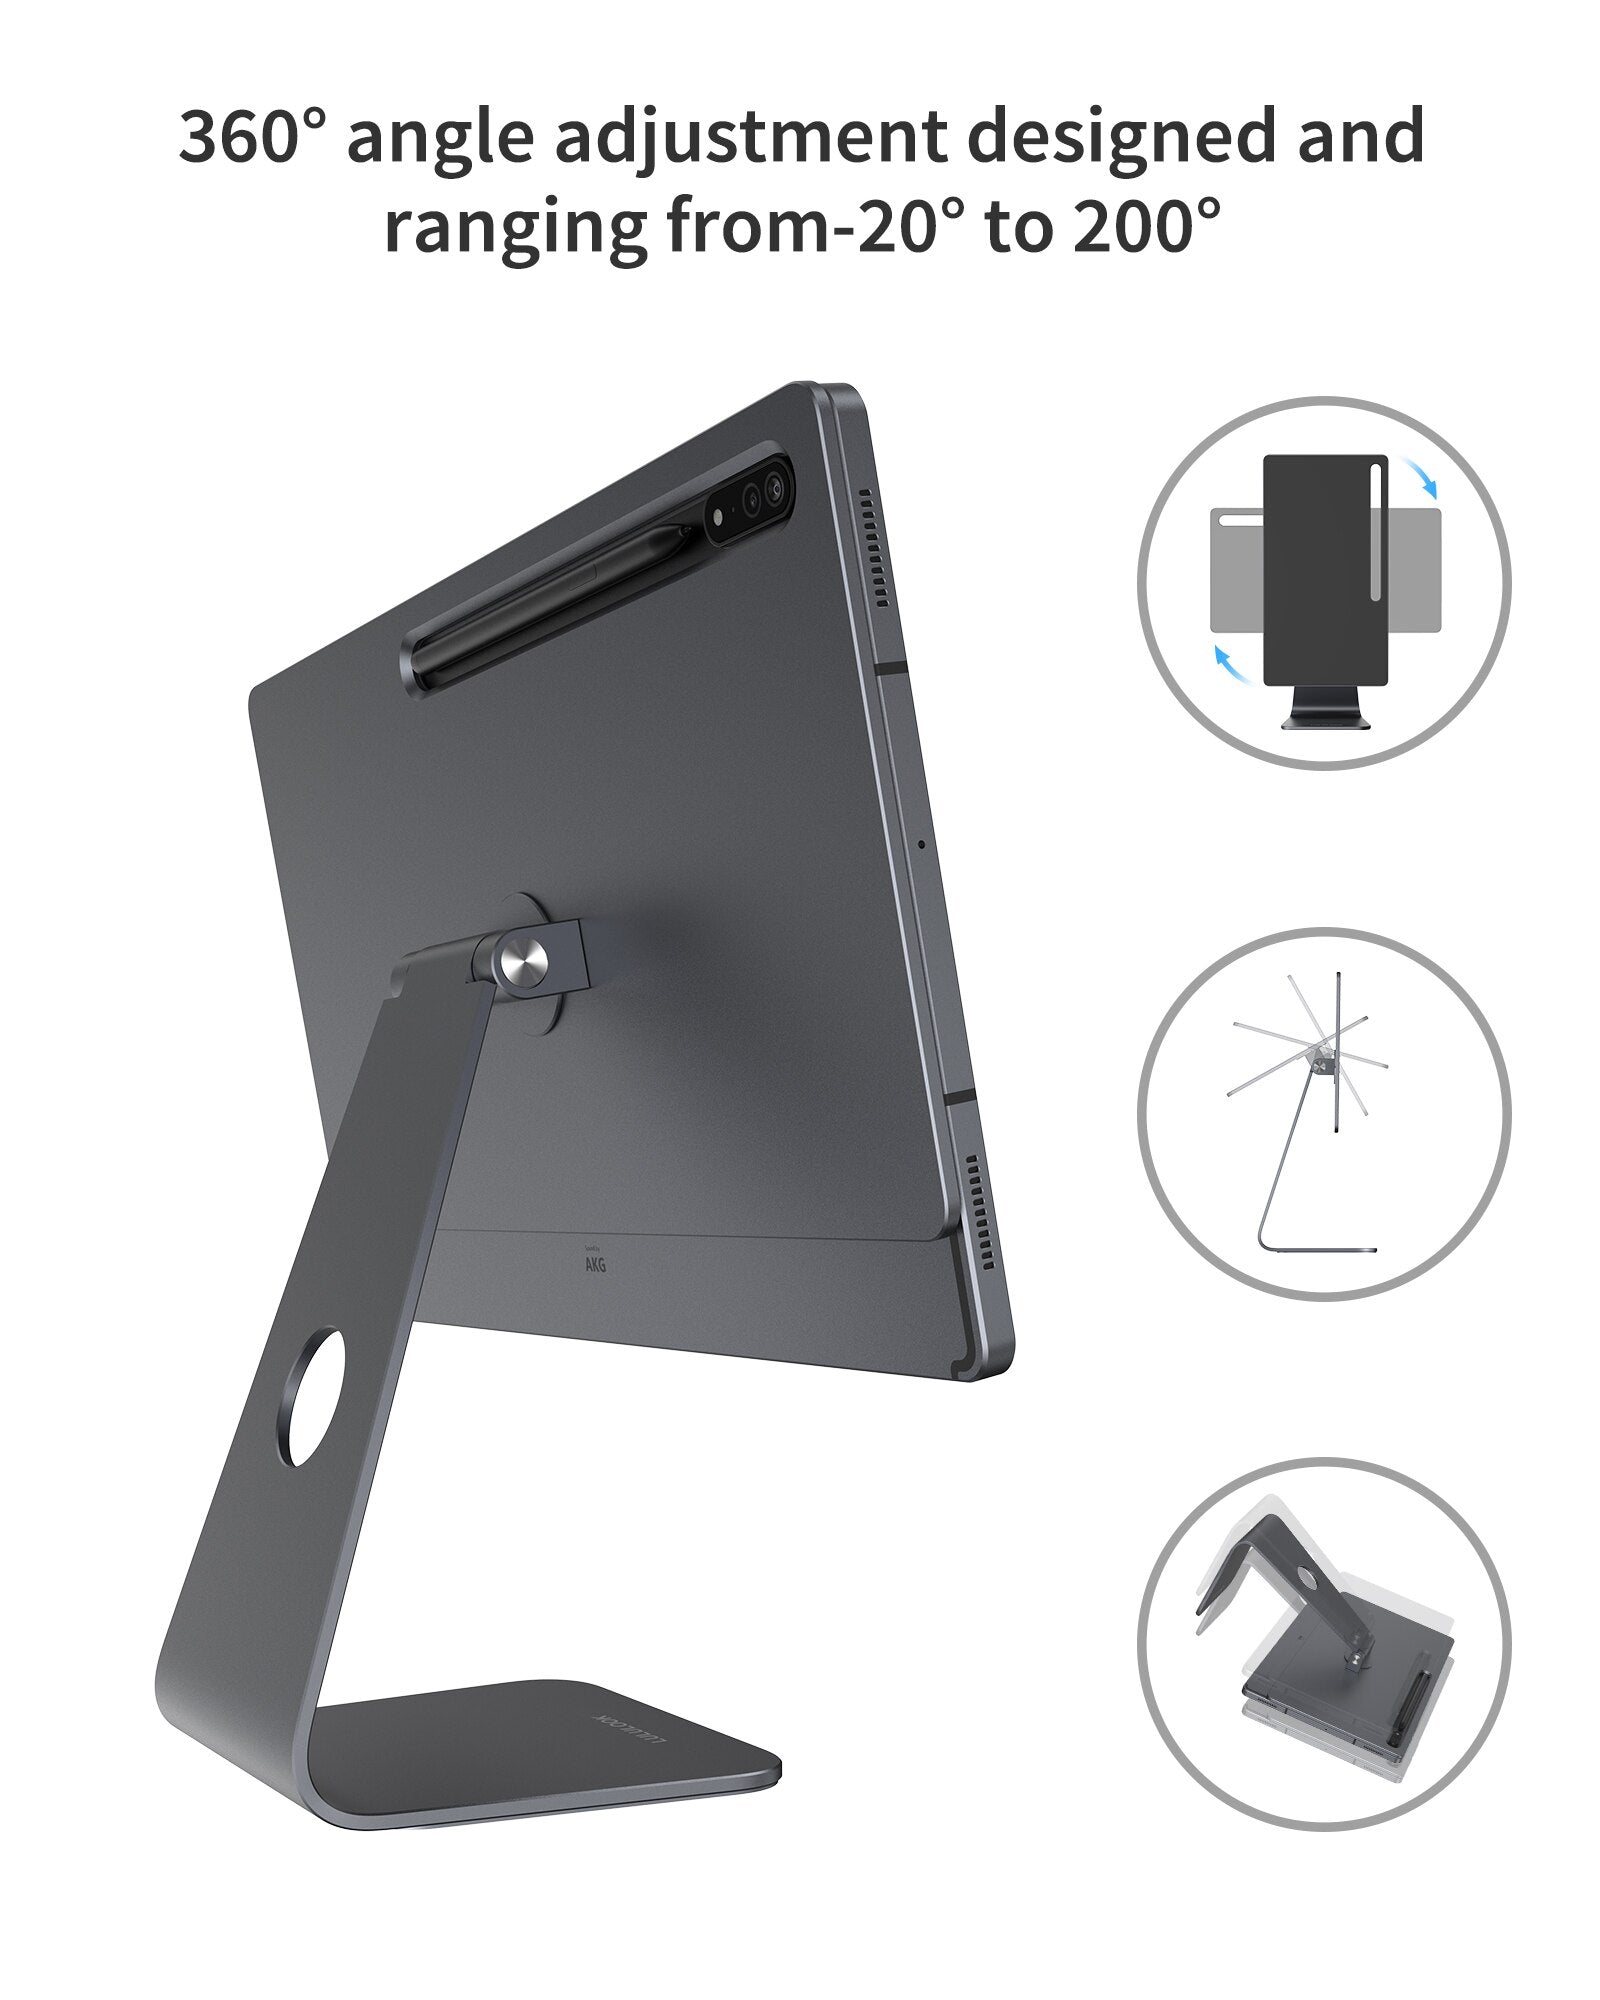 Lululook Magnetic Stand for Samsung Galaxy Tab S9/S8 Ultra, S8+/FE